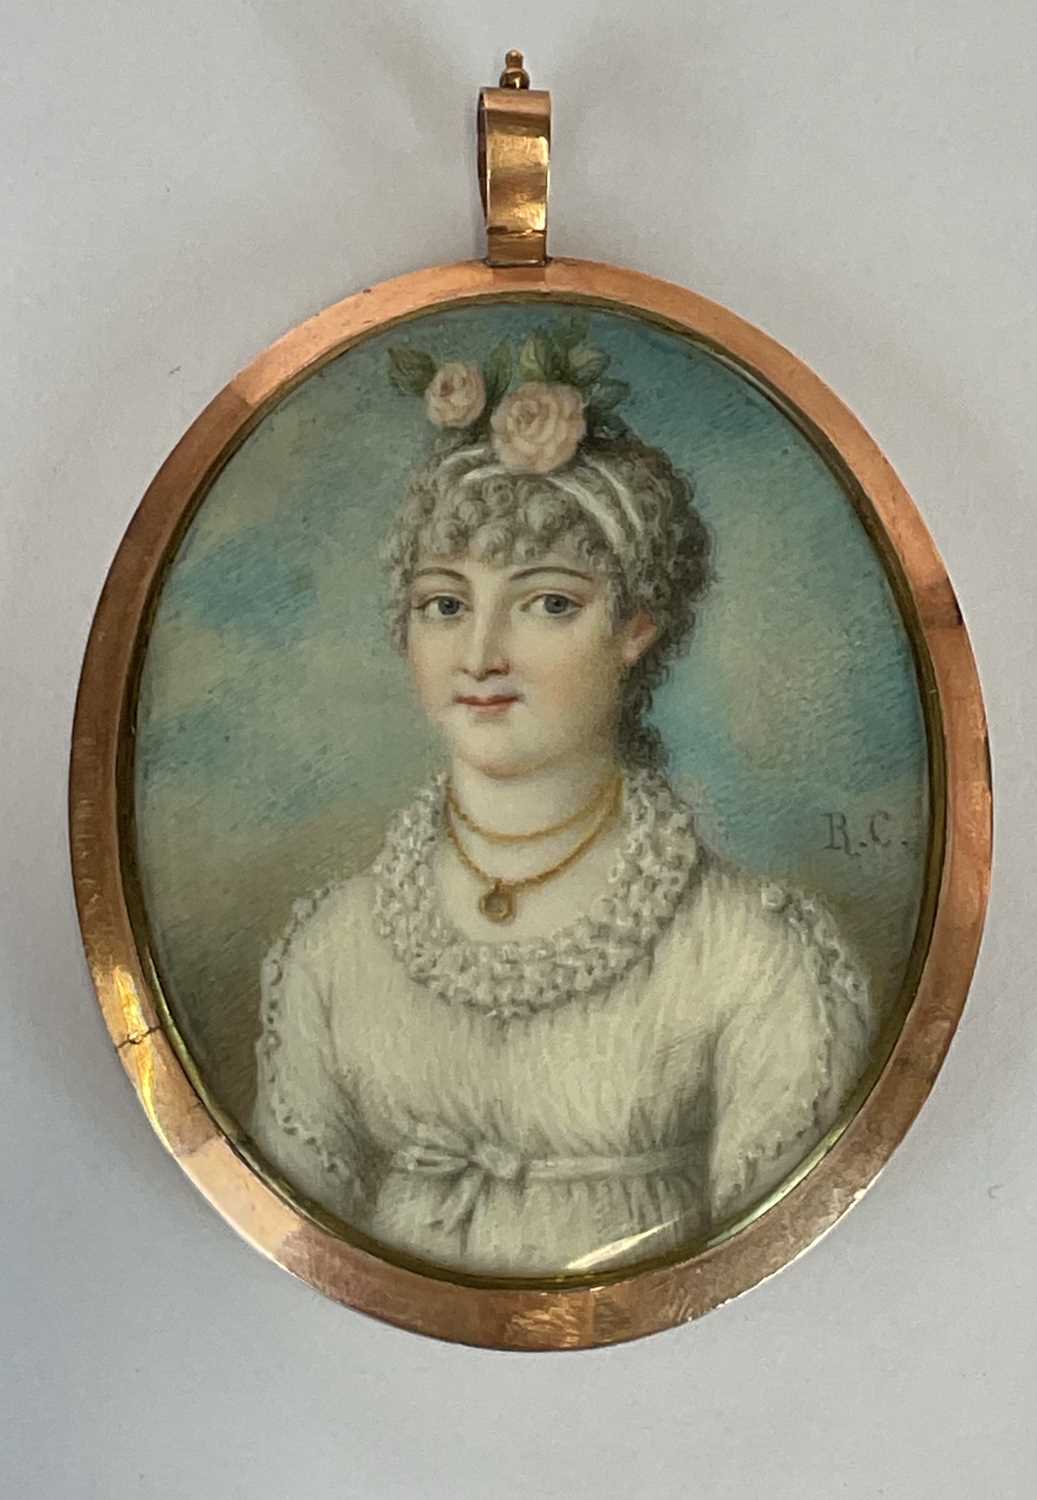 X IN THE MANNER OF RICHARD CROSSE; oval portrait miniature of a young woman with roses in her